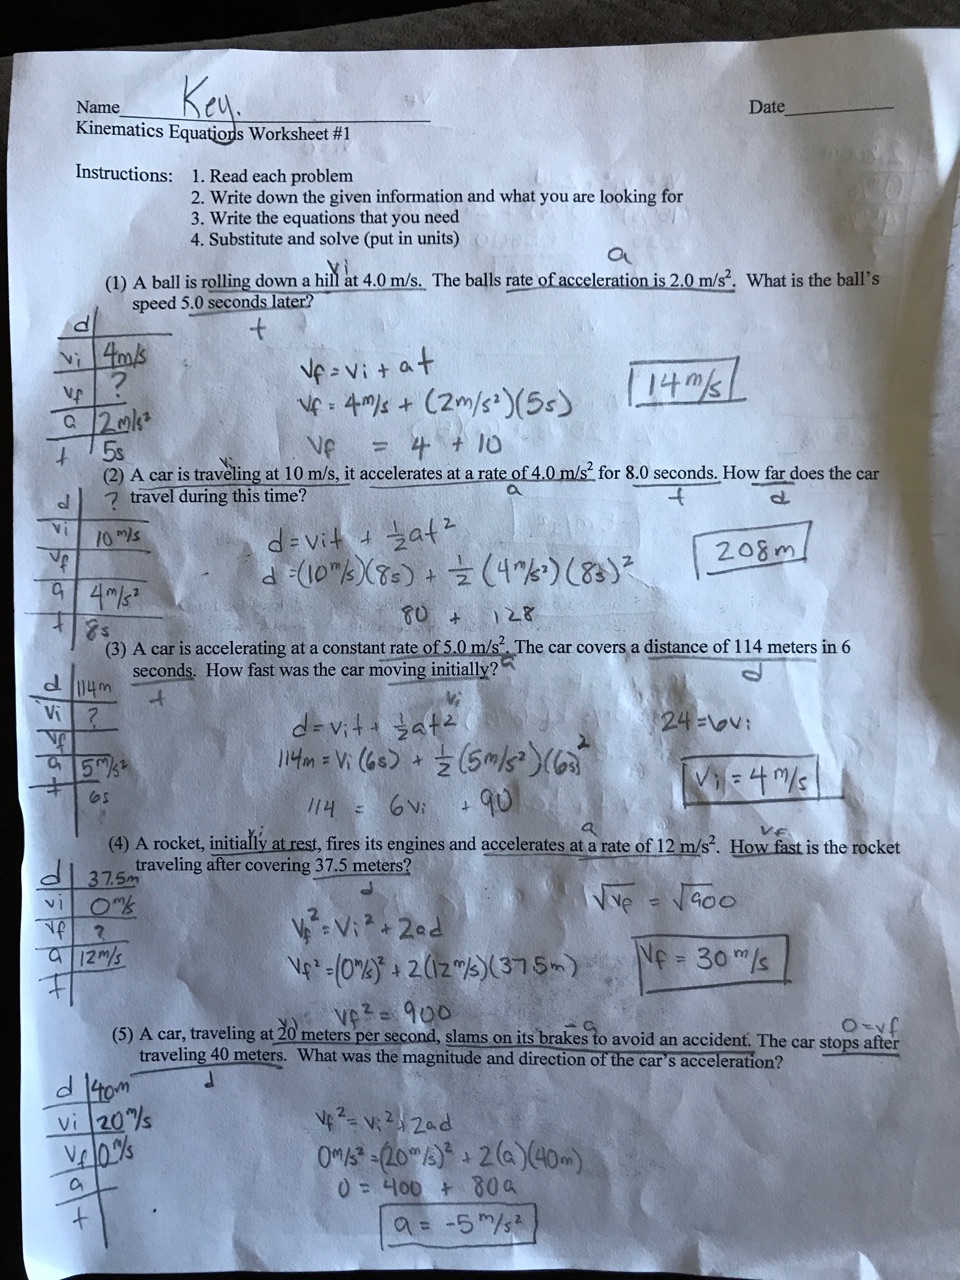 Linear Motion - Physics With Kinematics Worksheet With Answers